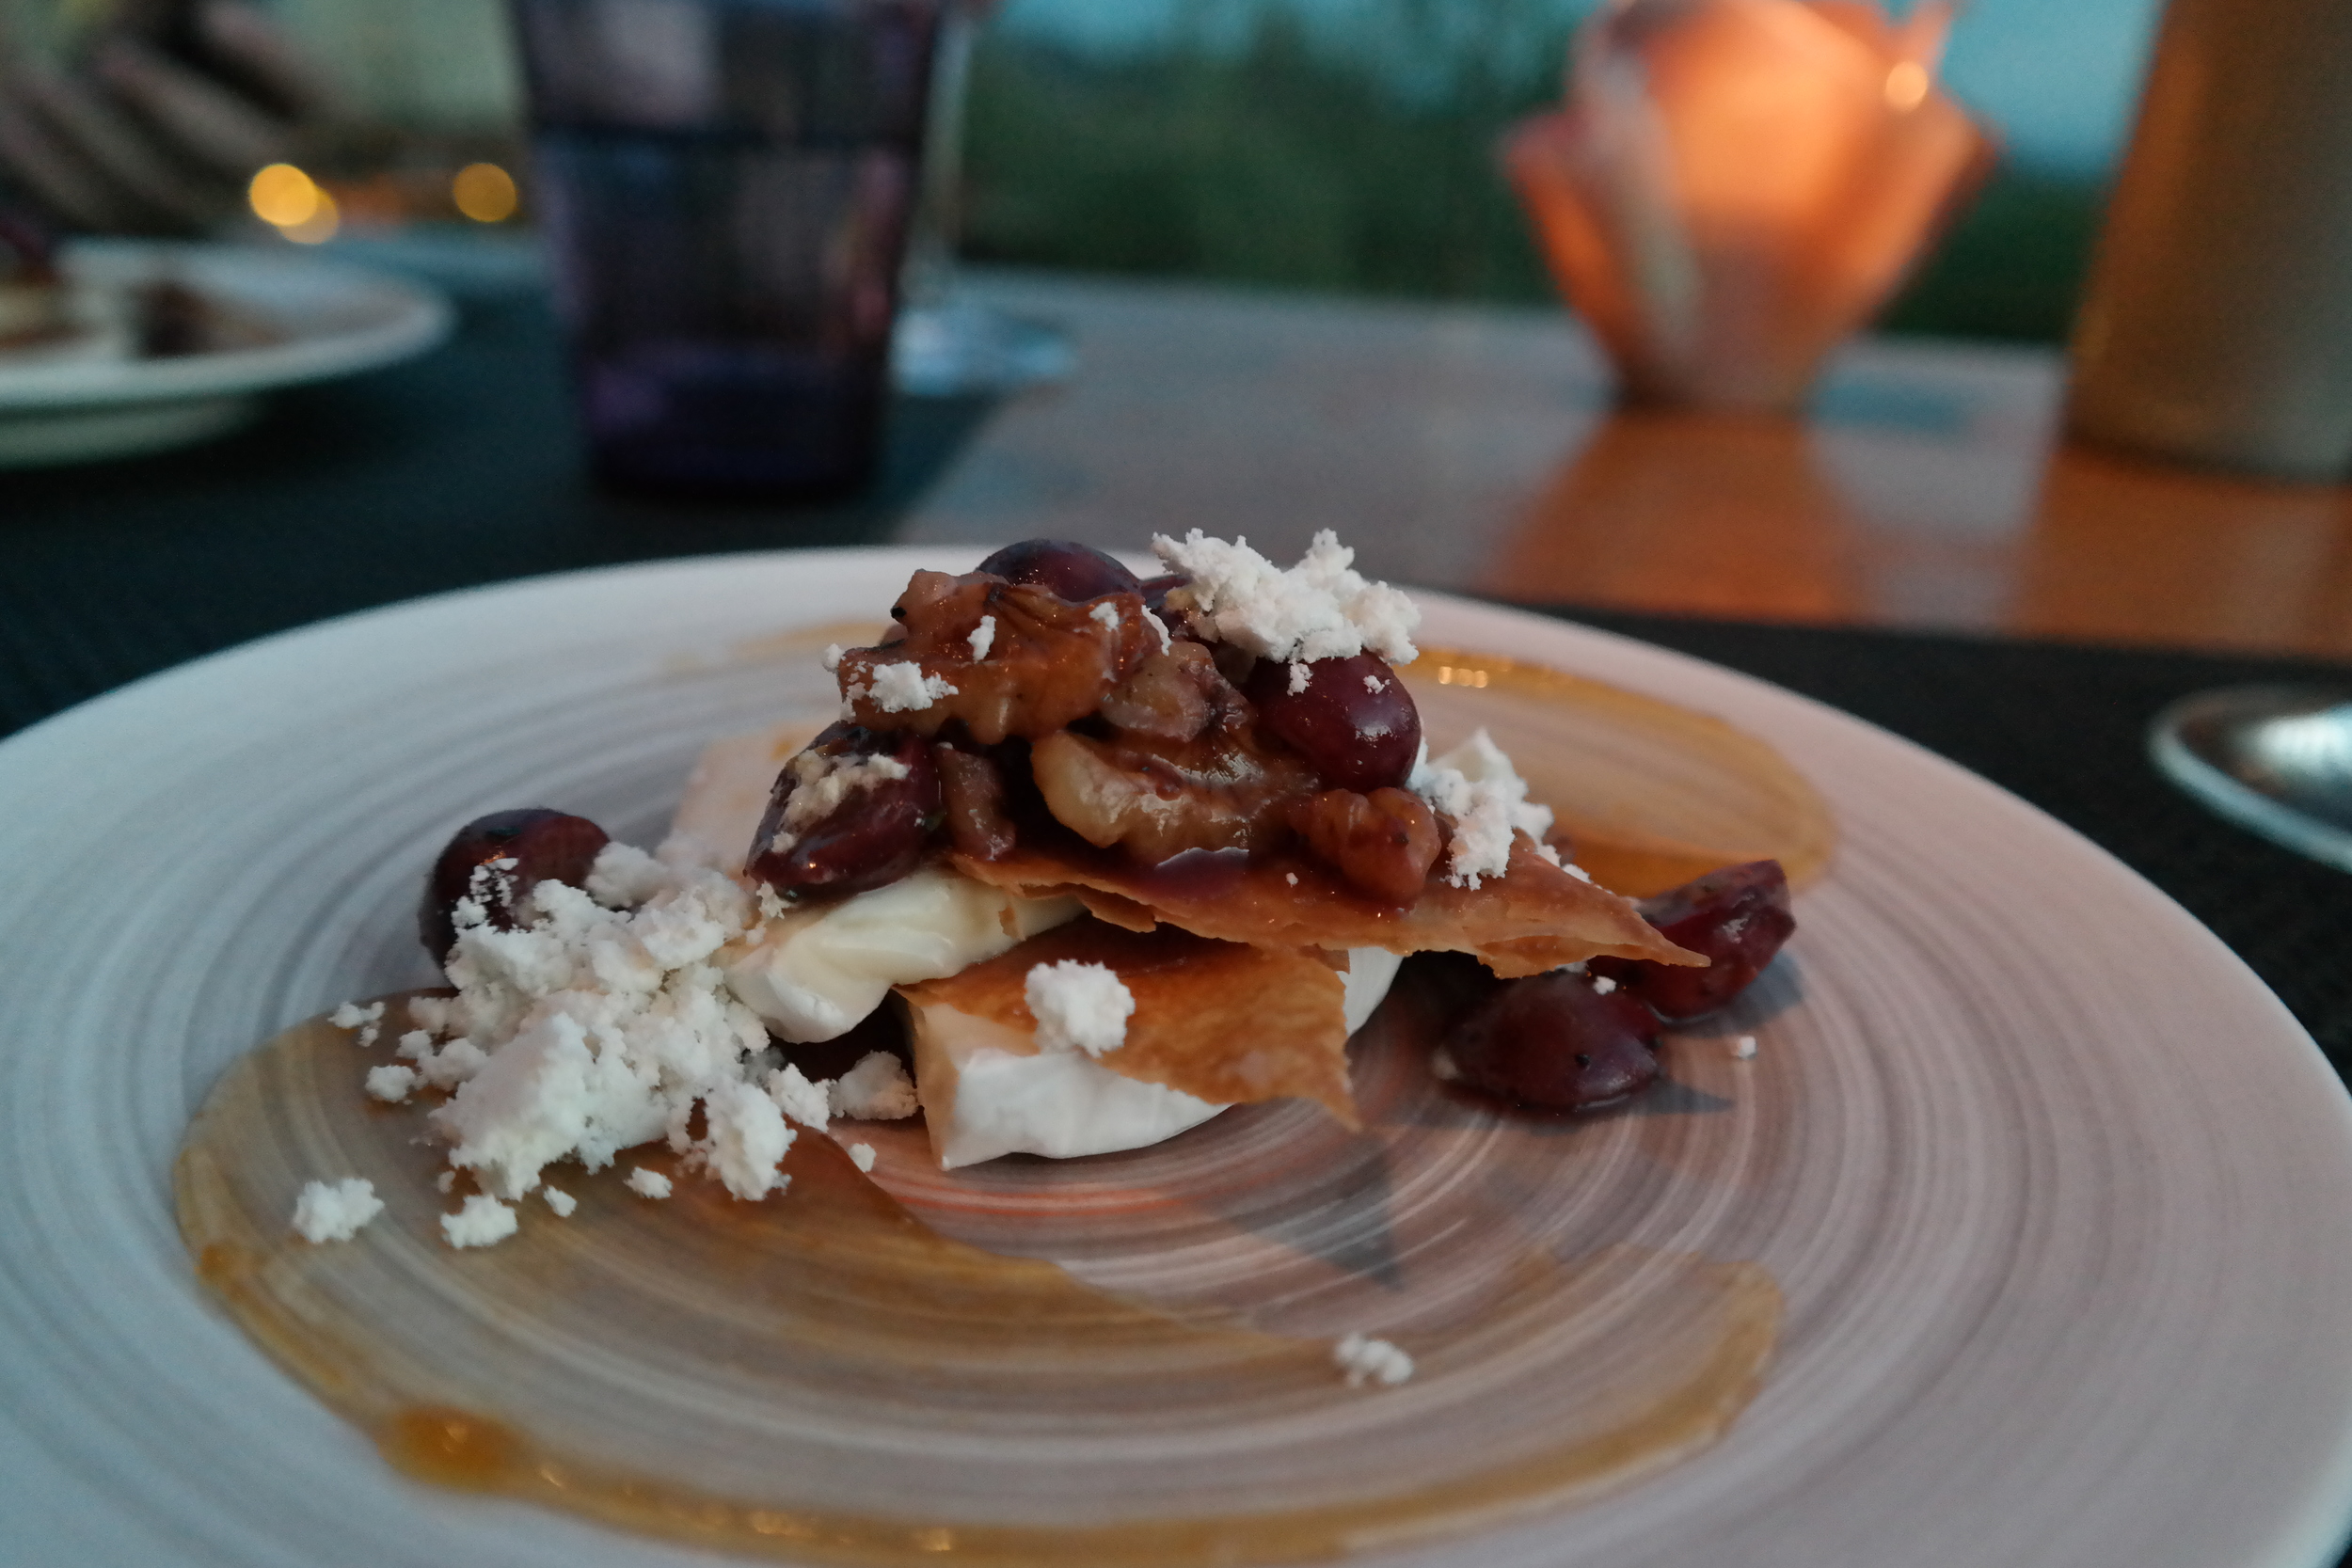 Triple creme brie Napoleon with grapes, walnuts, olive oil powder and apricot marmalade.